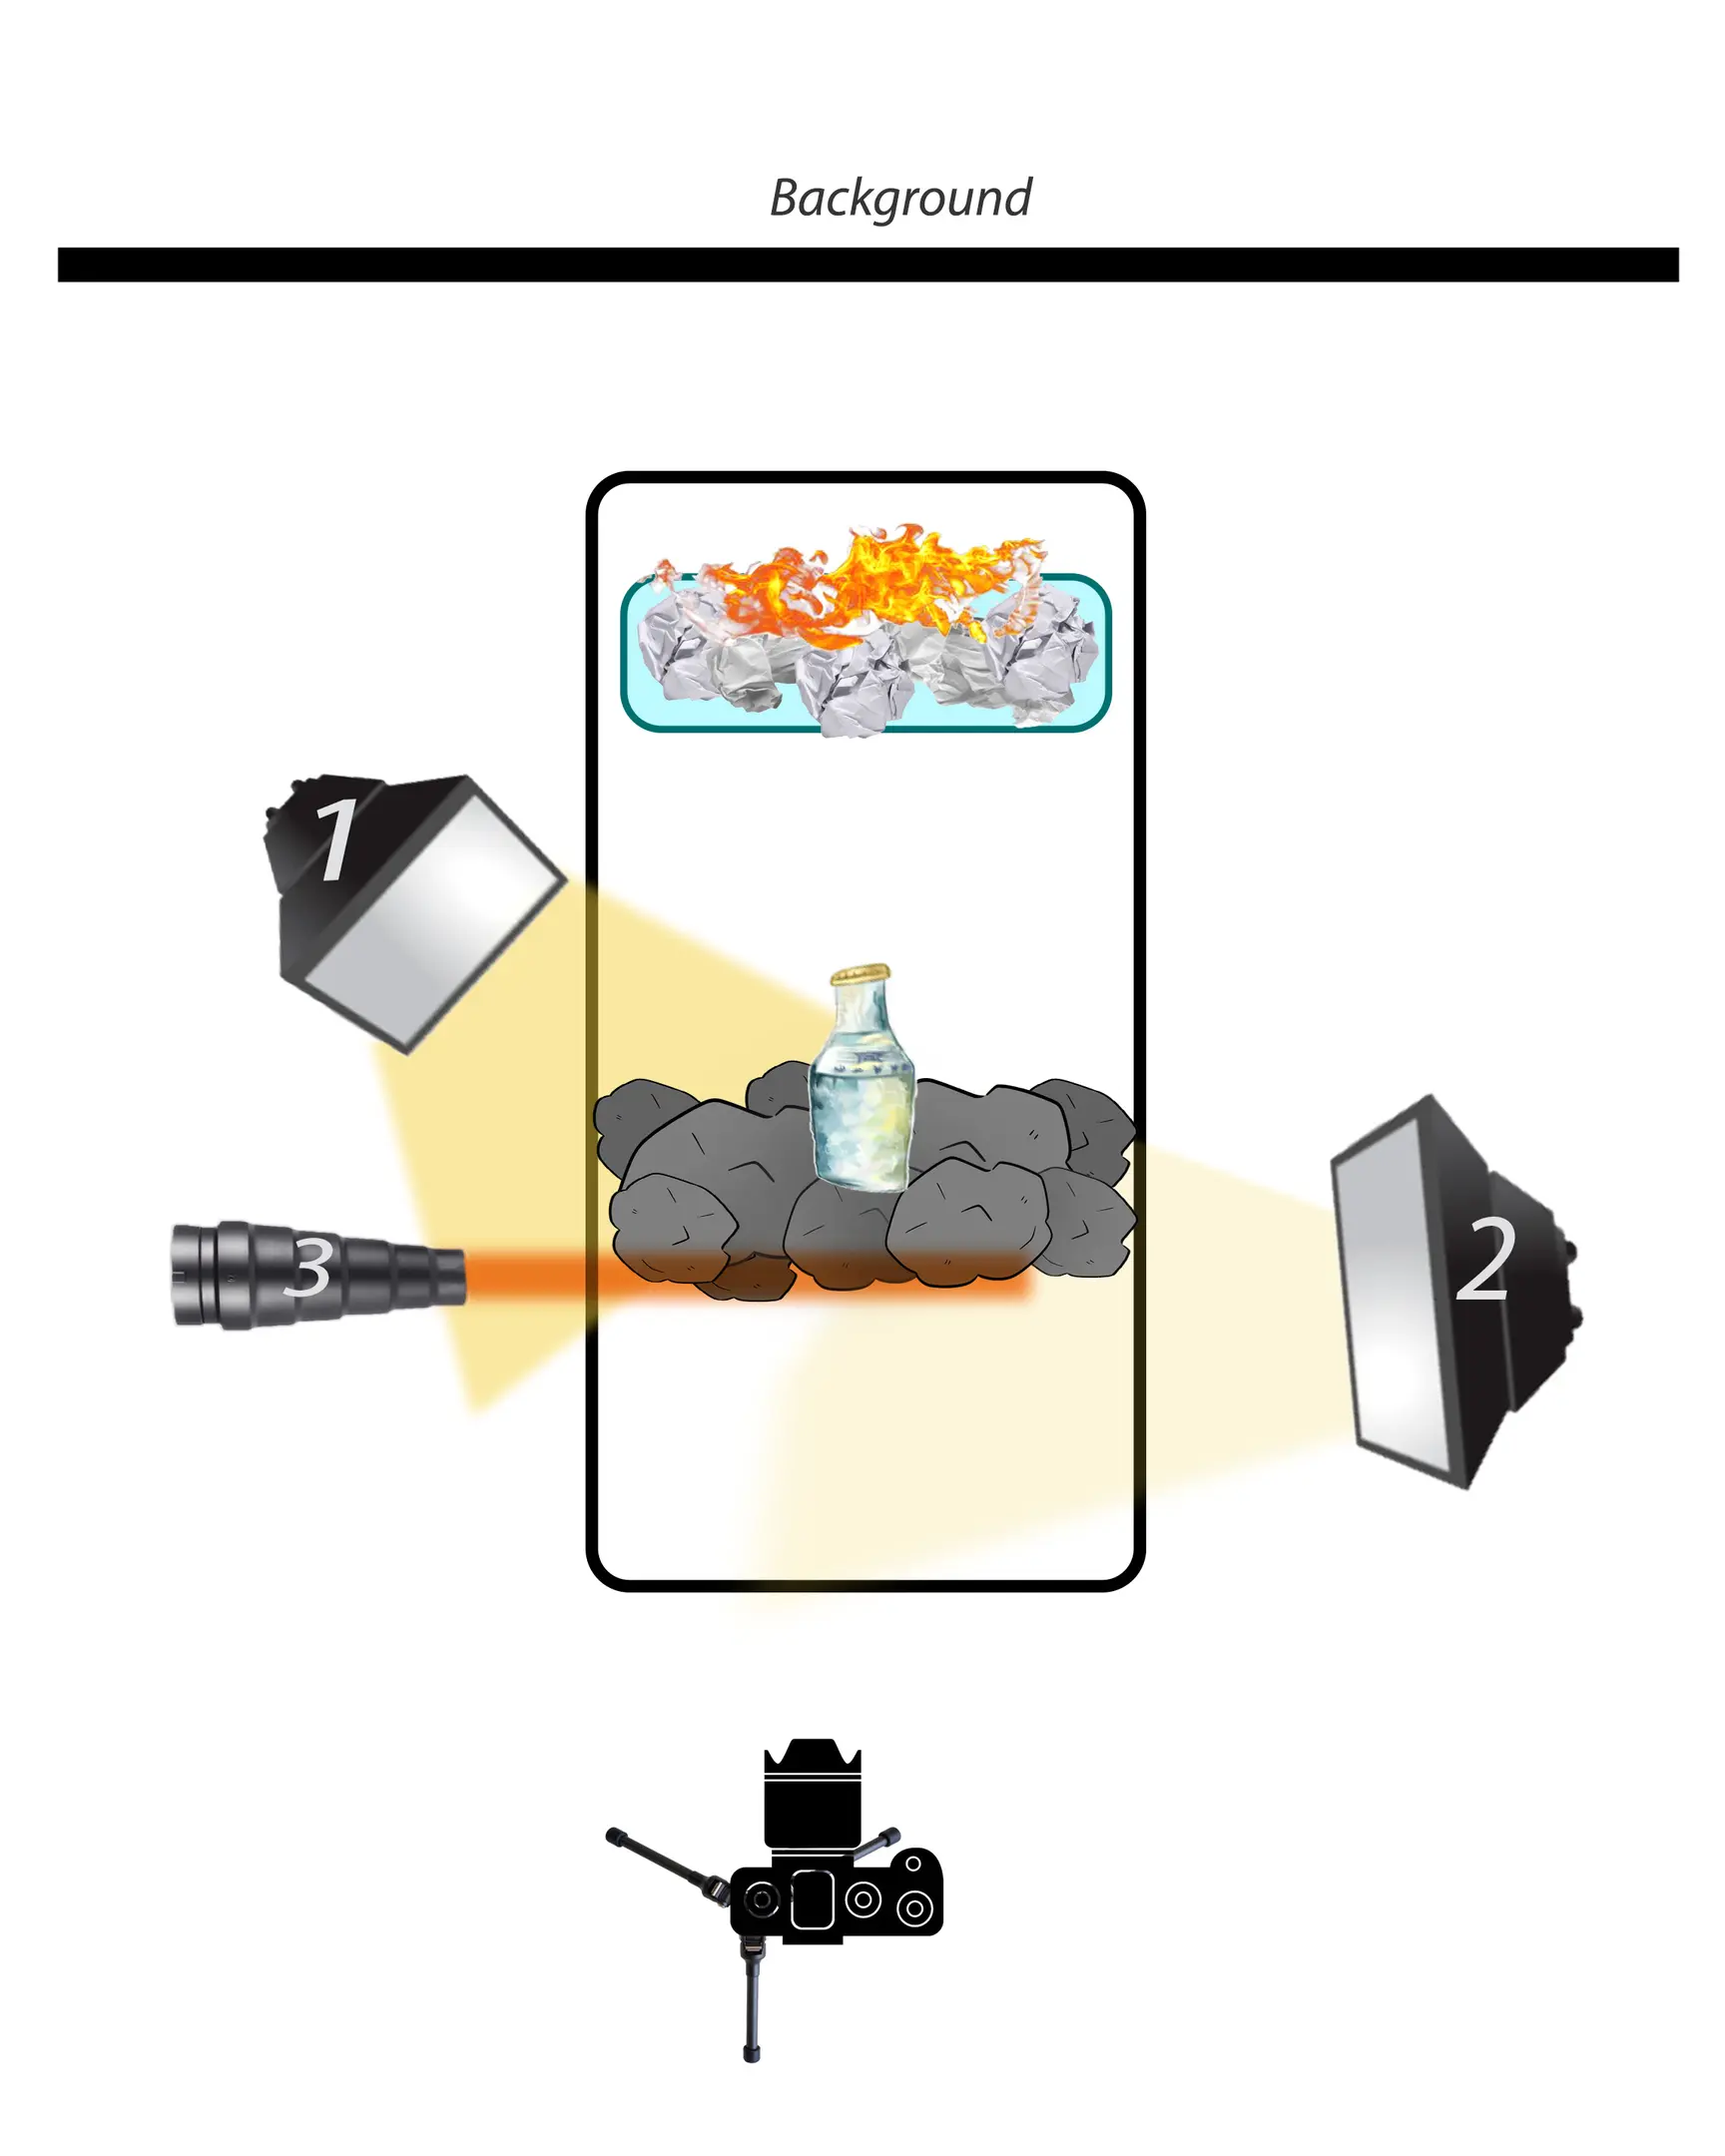 Light Schema 1. This diagram shows a bottle standing in the coals, in the background in a glass heat-resistant dish - which is depicted by a blue rectangle with rounded edges - there is a paper that burns. The diagram shows 2 flashes and the direction of their glow. As well as the position of the background and the camera.